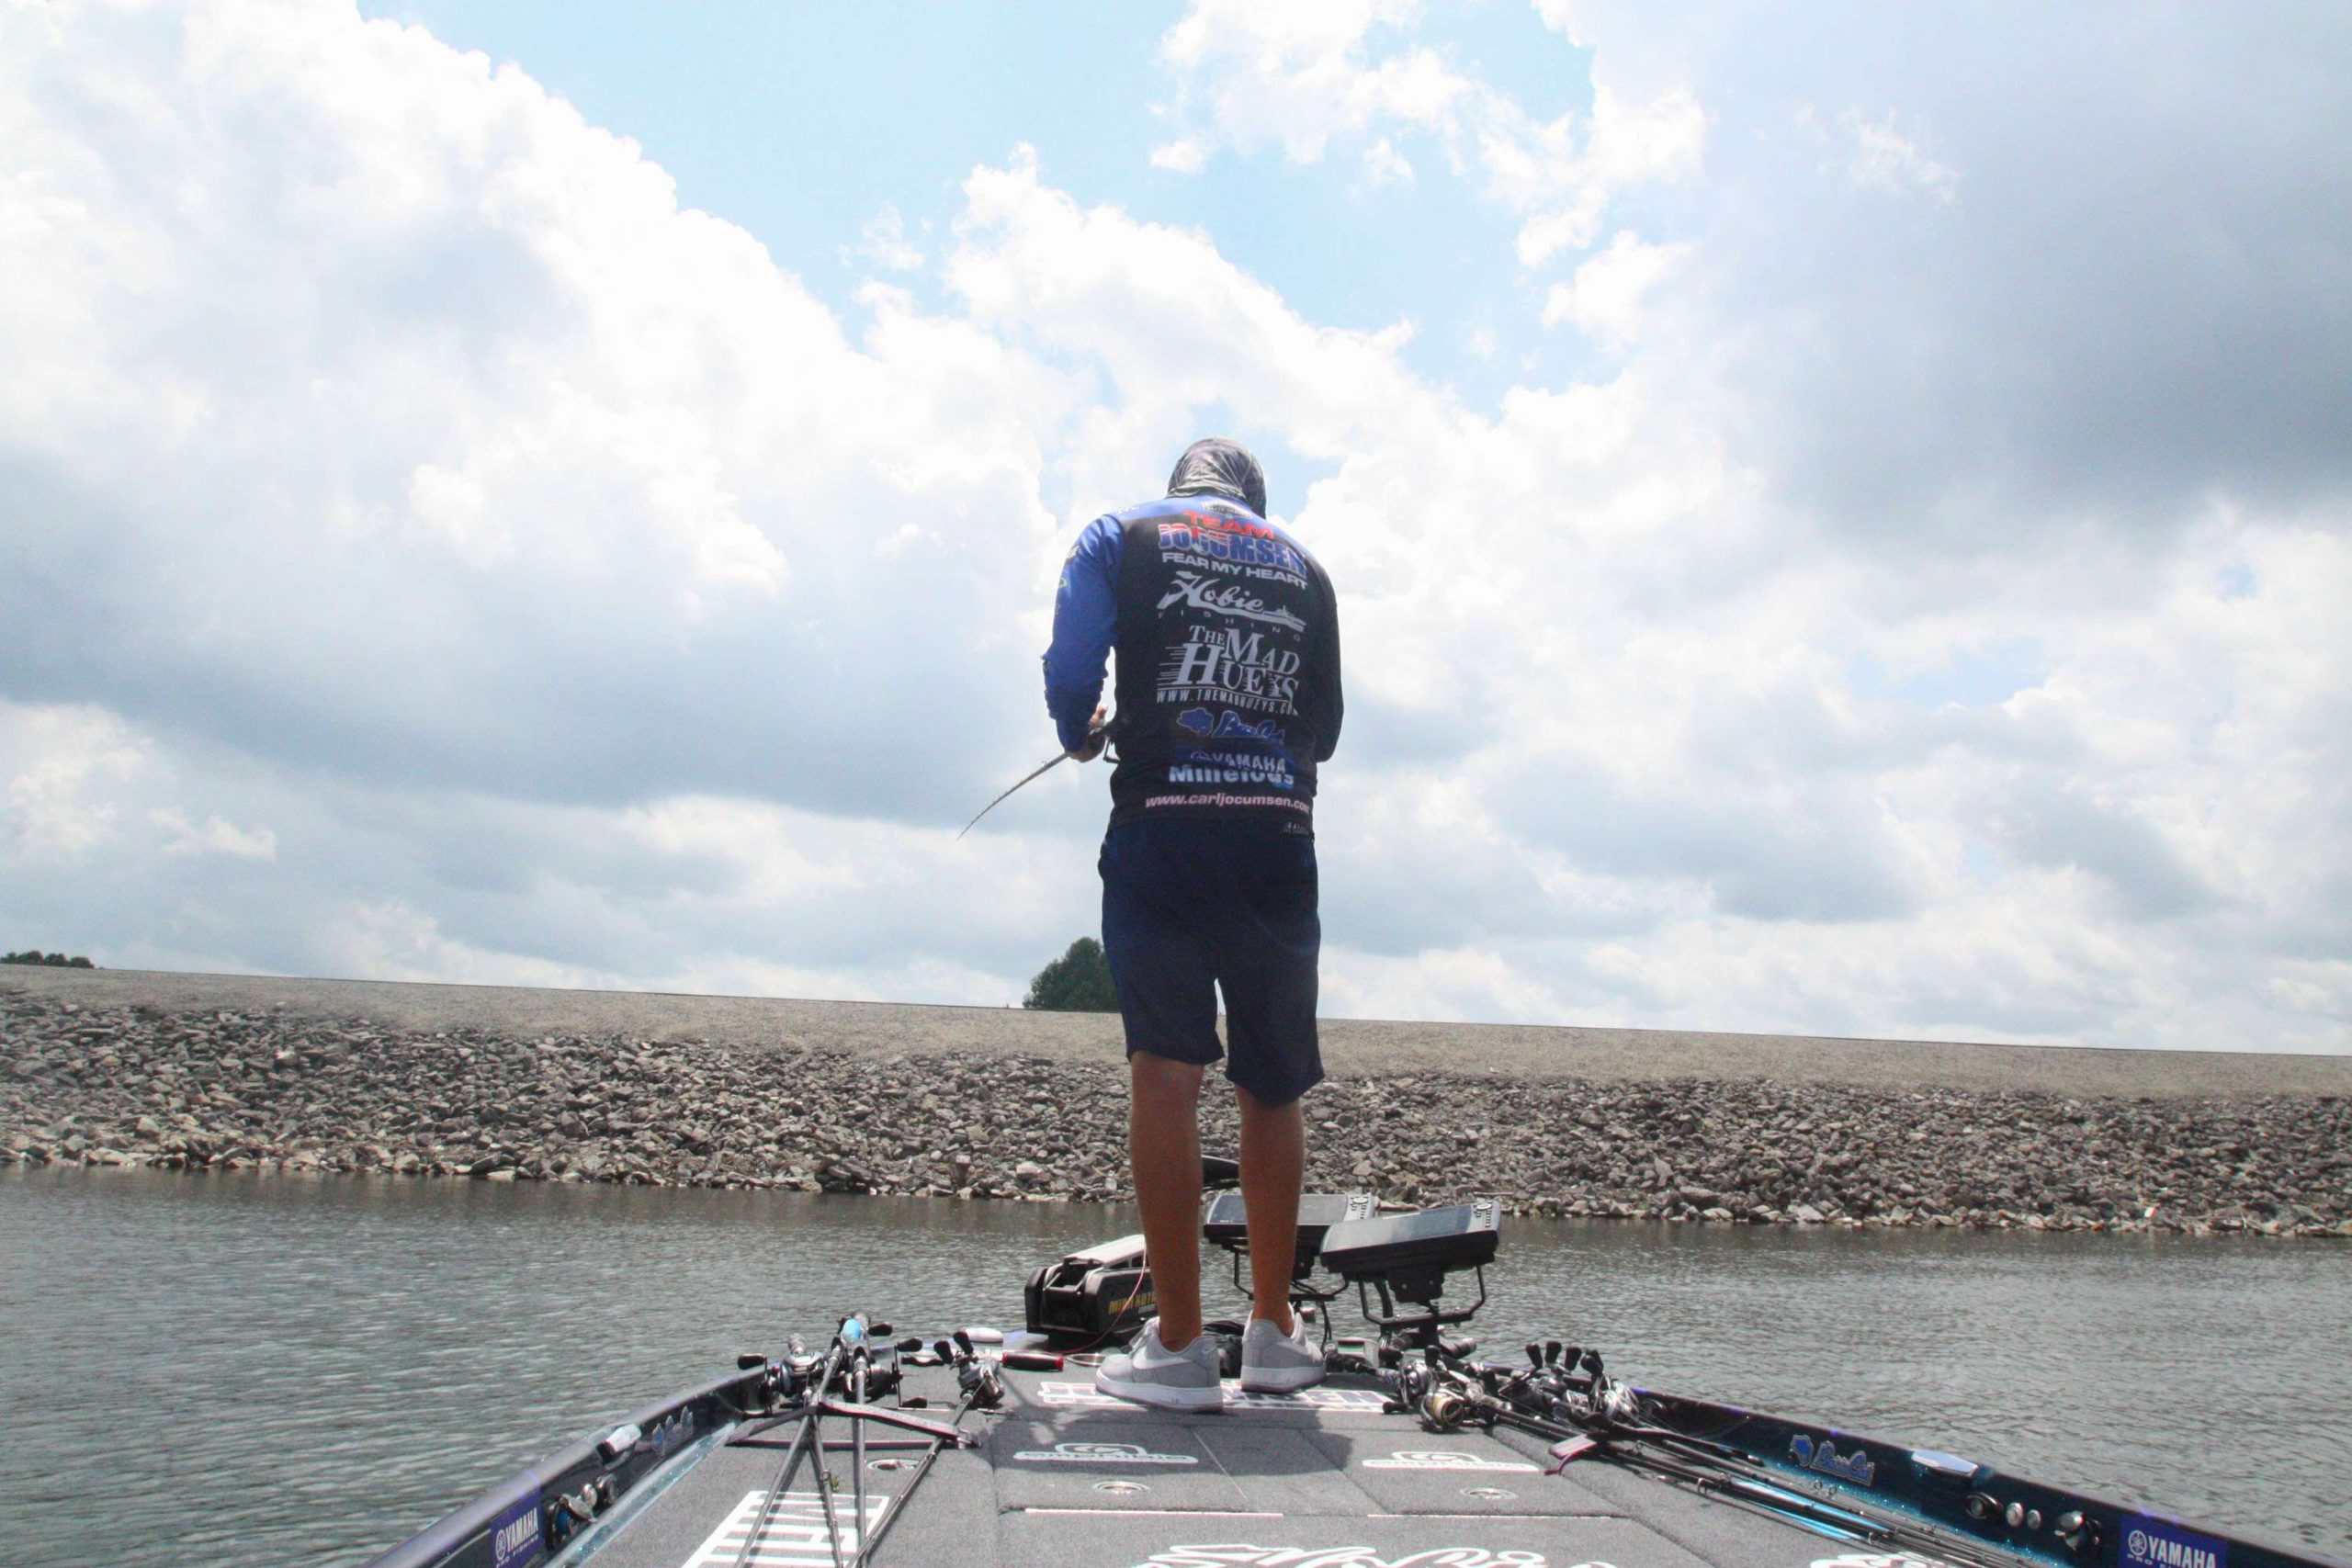 <b>1:10 p.m.</b> Jocumsen races downlake to a main-lake point. He hits it with the swim jig, spinnerbait and Roboworm. <br>
<b>1:17 p.m.</b> Moving farther downlake, Jocumsen probes an offshore rockpile with the Roboworm. âThereâs a load of fish here, but theyâre all suspended.â <br>
<b>1:21 p.m.</b> Jocumsen tries the underspin swimbait off the rockpile. âThis usually works well on suspended fish.â But not today! <br>
<b>1:30 p.m.</b> Jocumsen has returned to Lake Lâs dam and is retrieving an 8-inch Megabass swimbait around the structure. âIâm going for the 12-pounder!â <br>
<b>1:45 p.m.</b> Timeâs up! Jocumsen ends his day on Lake L with three keeper bass totaling 8 pounds, 5 ounces.
<p>
<b>THE DAY IN PERSPECTIVE</b><br>
âI thought I was onto something when I caught that 4-15 out of the pads early, but I couldnât get on any more big fish on that pattern,â Jocumsen told Bassmaster. âI had a lot more bites off deep structure than I did in the pads, but they were mostly from very small fish. Still, I didnât move out deeper until 11 a.m.</b>, so I didnât have much time left to locate more deep places that might have held bigger fish. If I were to fish here tomorrow, Iâd head straight to those tributary pads and hit them hard until the bite tapered off, then Iâd nose around offshore and look for more deep spots instead of rehitting the pad fields that didnât produce for me today.â
 <p>
<b>WHERE AND WHEN CARL JOCUMSEN CAUGHT HIS KEEPER BASS</b><br>
1 pound, 4 ounces; blue and white Molix WTD weedless surface rat; lily pads near tributary mouth; 8:07 a.m. <br>
4 pounds, 15 ounces; same lure and place as No. 1; 8:13 a.m. <br>
2 pounds, 2 ounces; same lure as No. 1; lily pads in upper end; 12:48 p.m.<br>
TOTAL: 8 POUNDS, 5 OUNCES